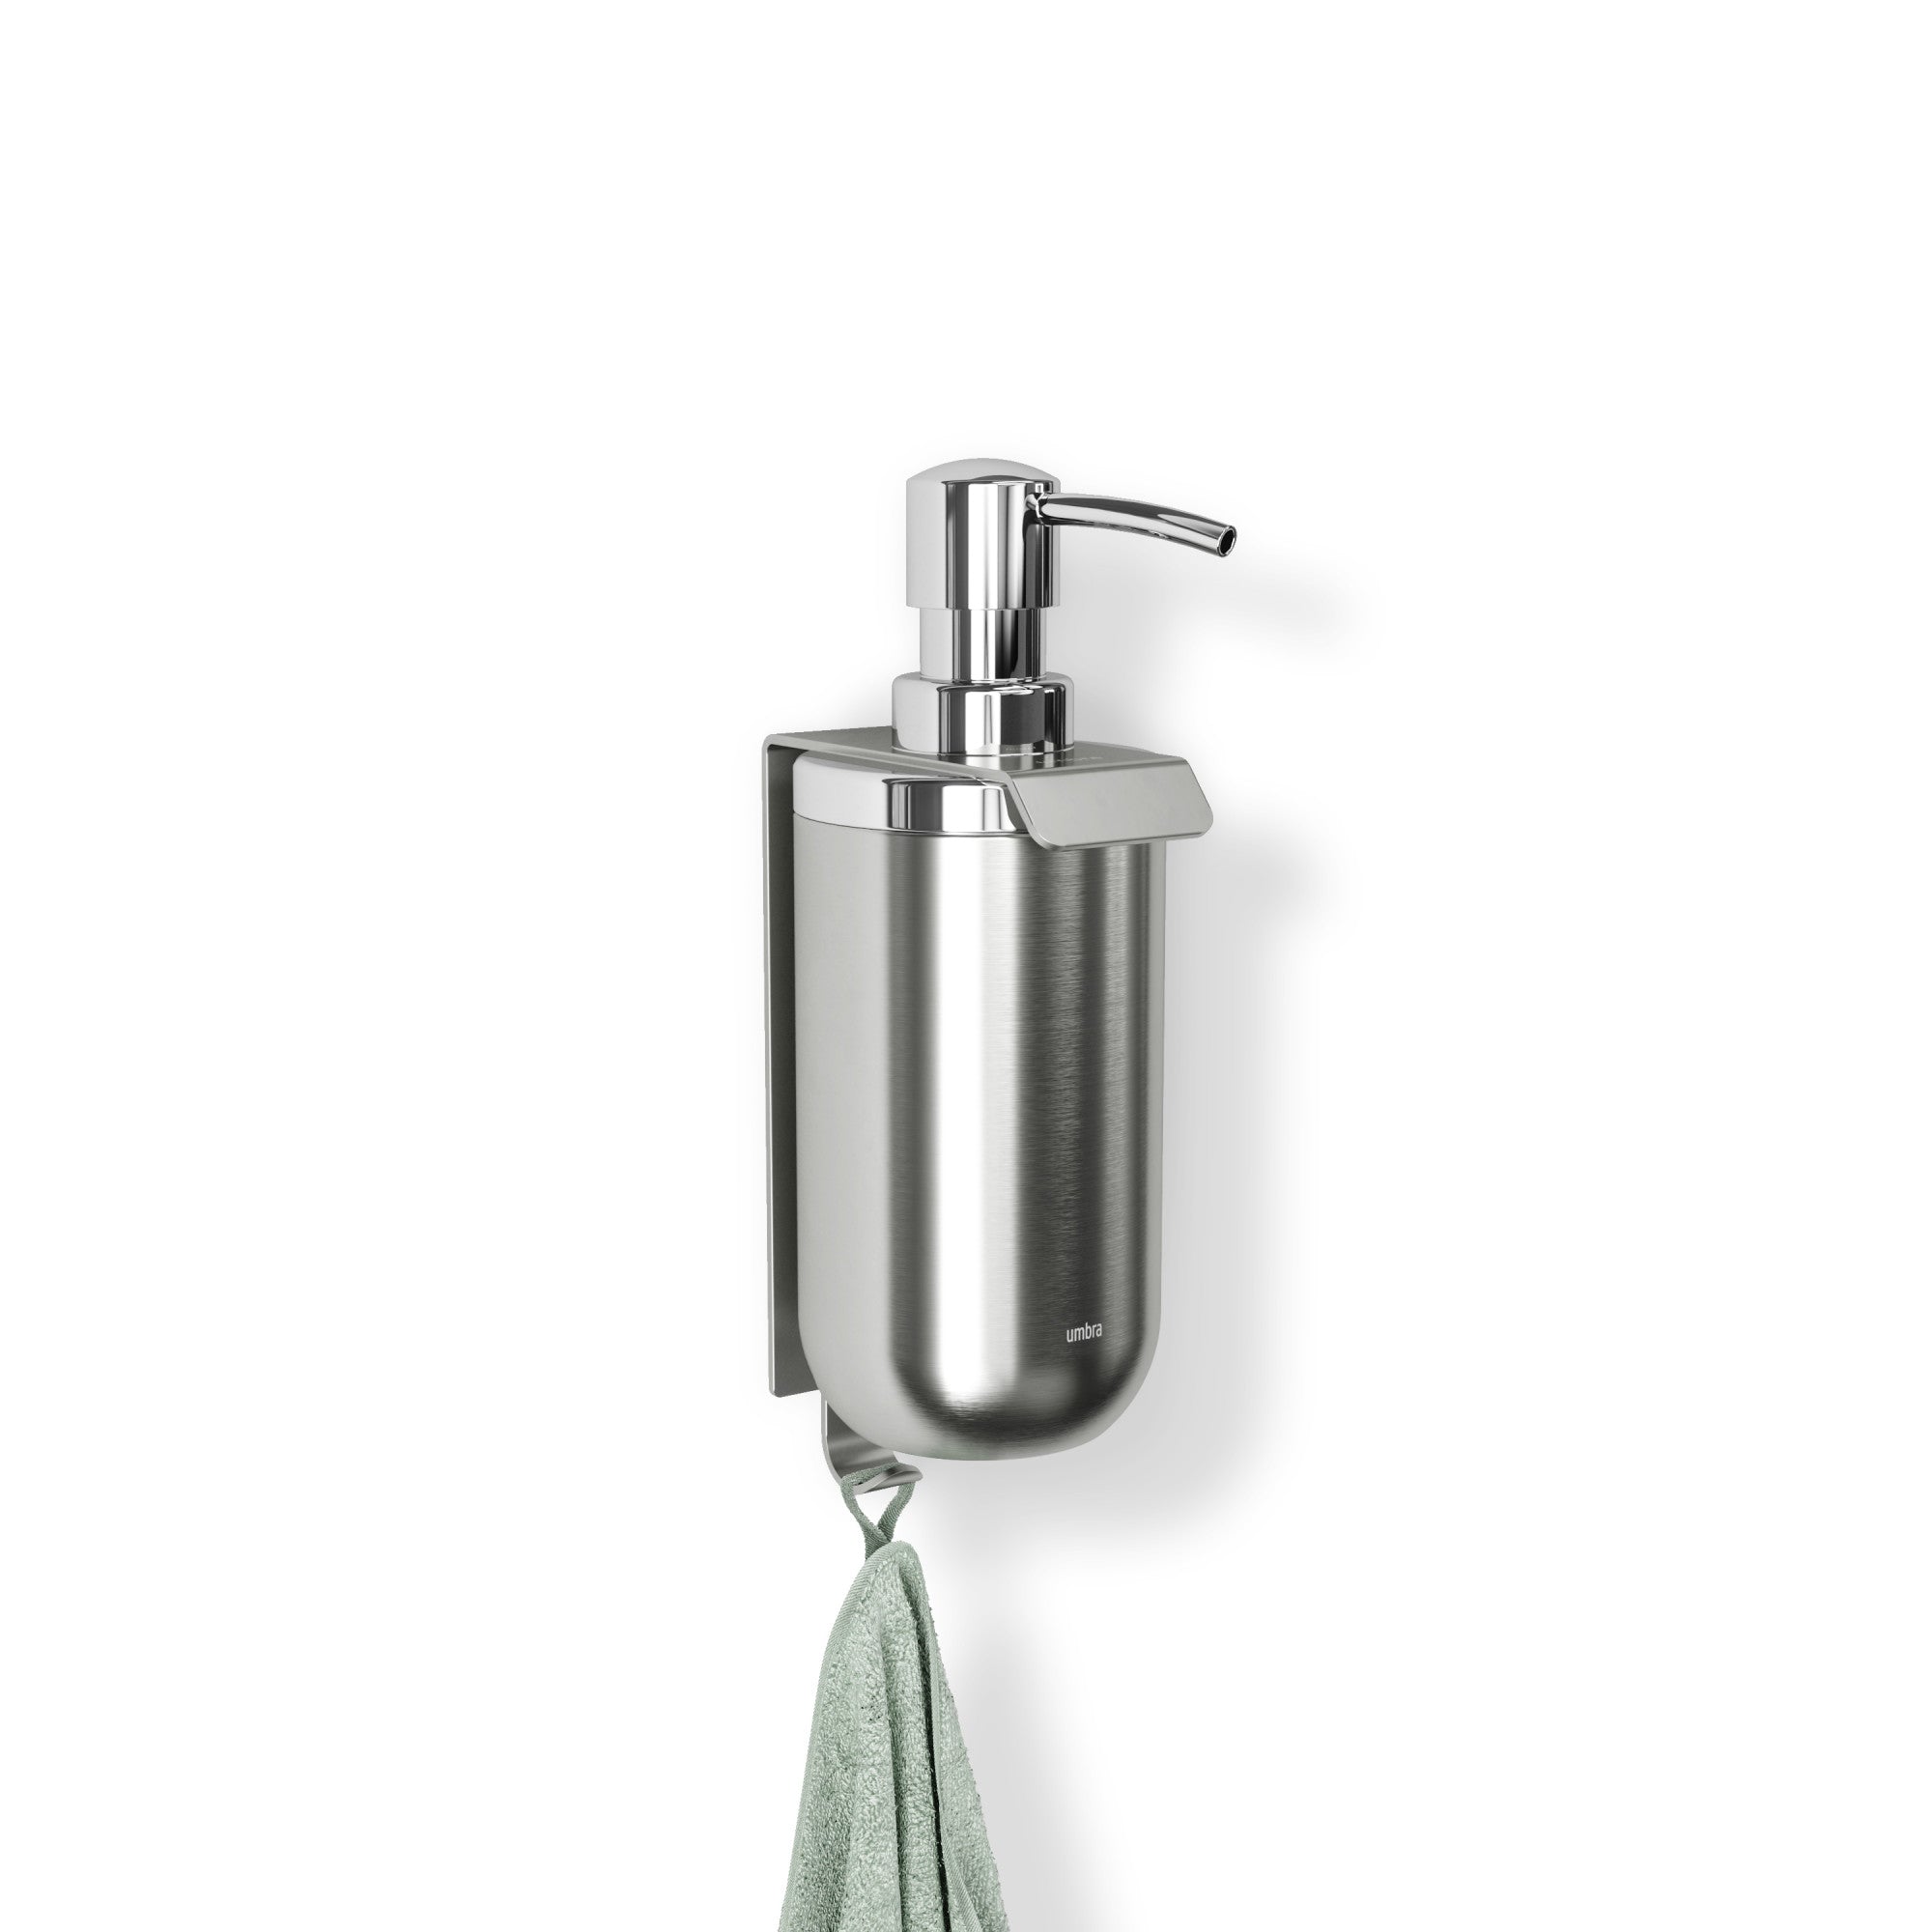 
Soap Dispensers | color: Stainless Steel | size: 1-Pack | https://player.vimeo.com/video/533686676